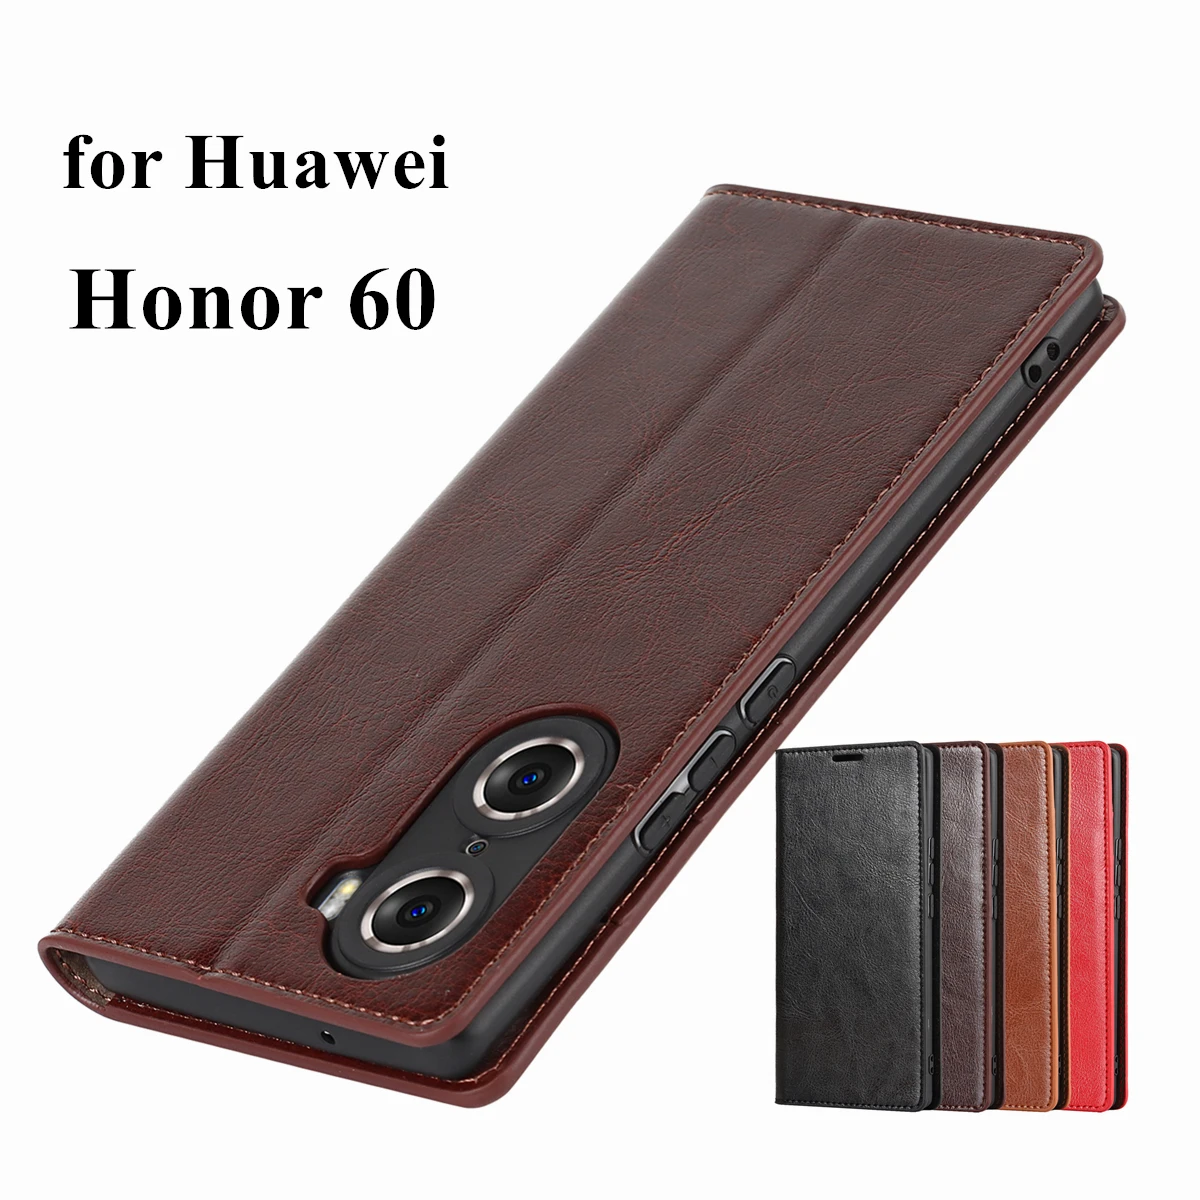 

Deluxe Wallet Case for Huawei Honor 60 6.67-inches Genuine Cow Leather Case Flip Cover Real Skin Phone Bags